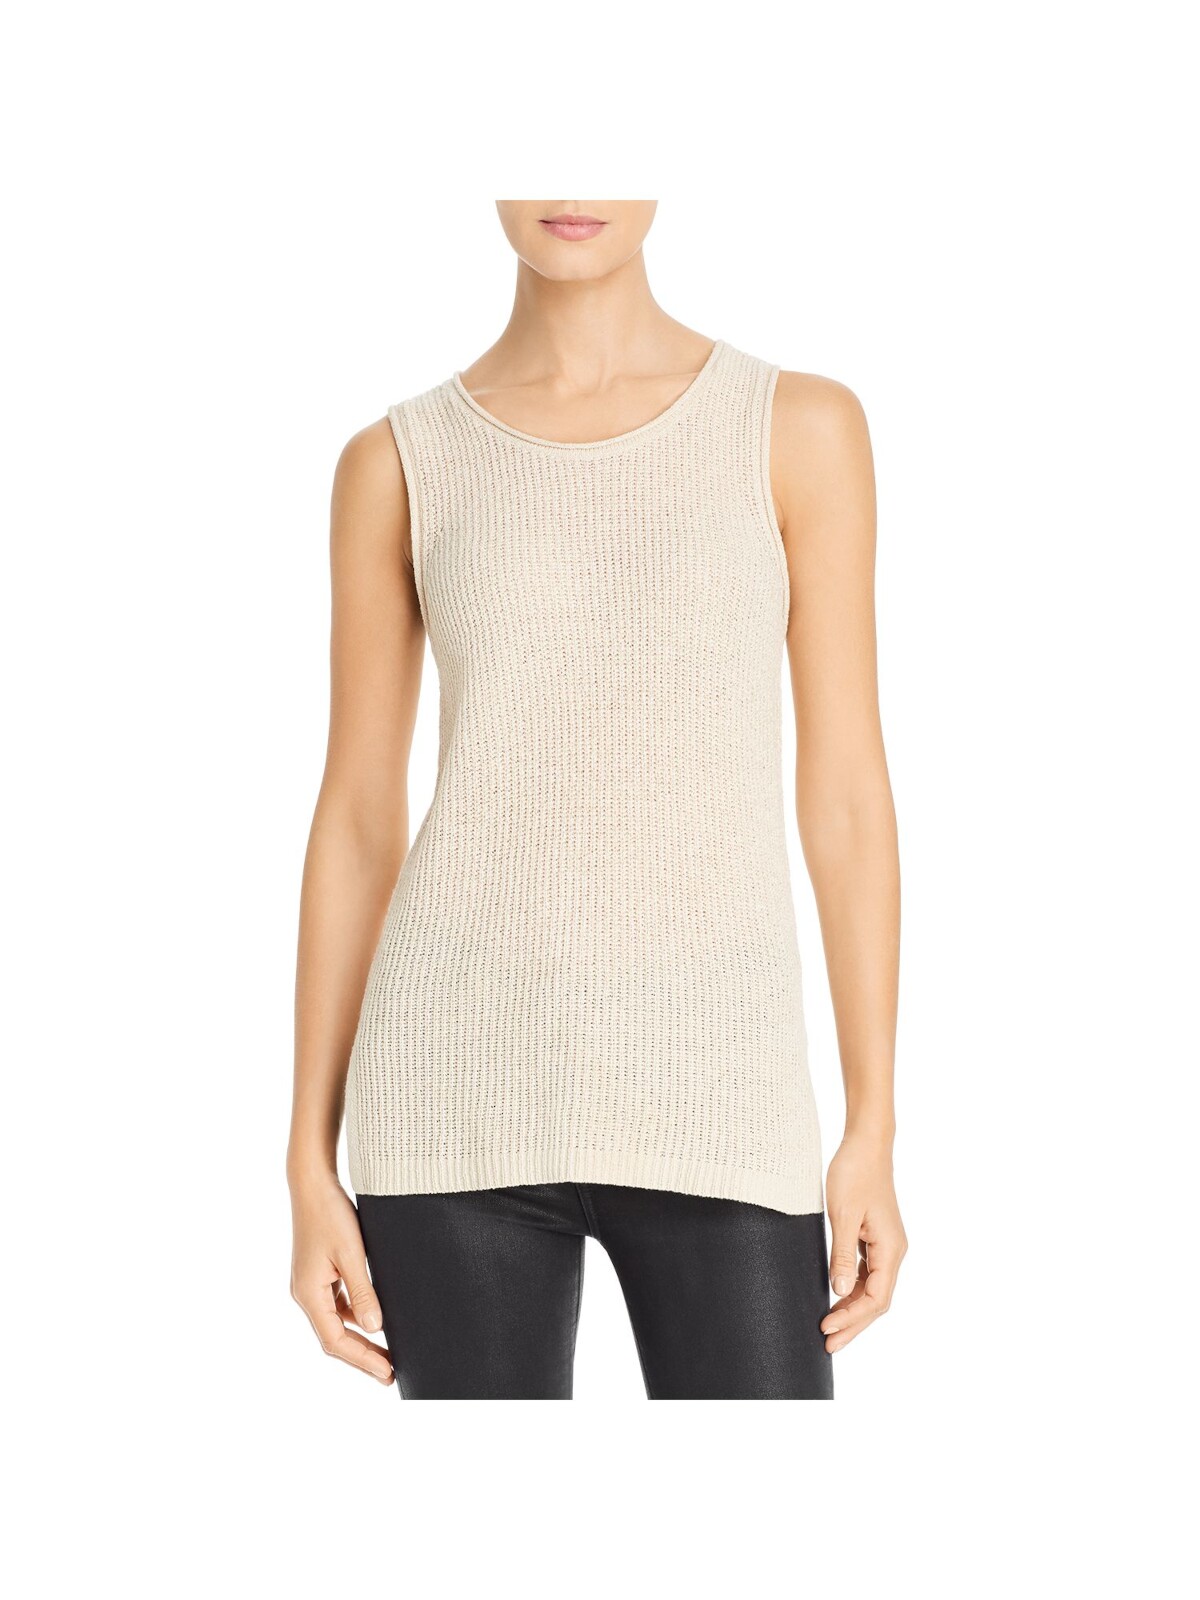 MARLED REUNITED CLOTHING Womens Beige Knit Ribbed Slitted Rolled Edge Sleeveless Scoop Neck Wear To Work Tank Sweater XS